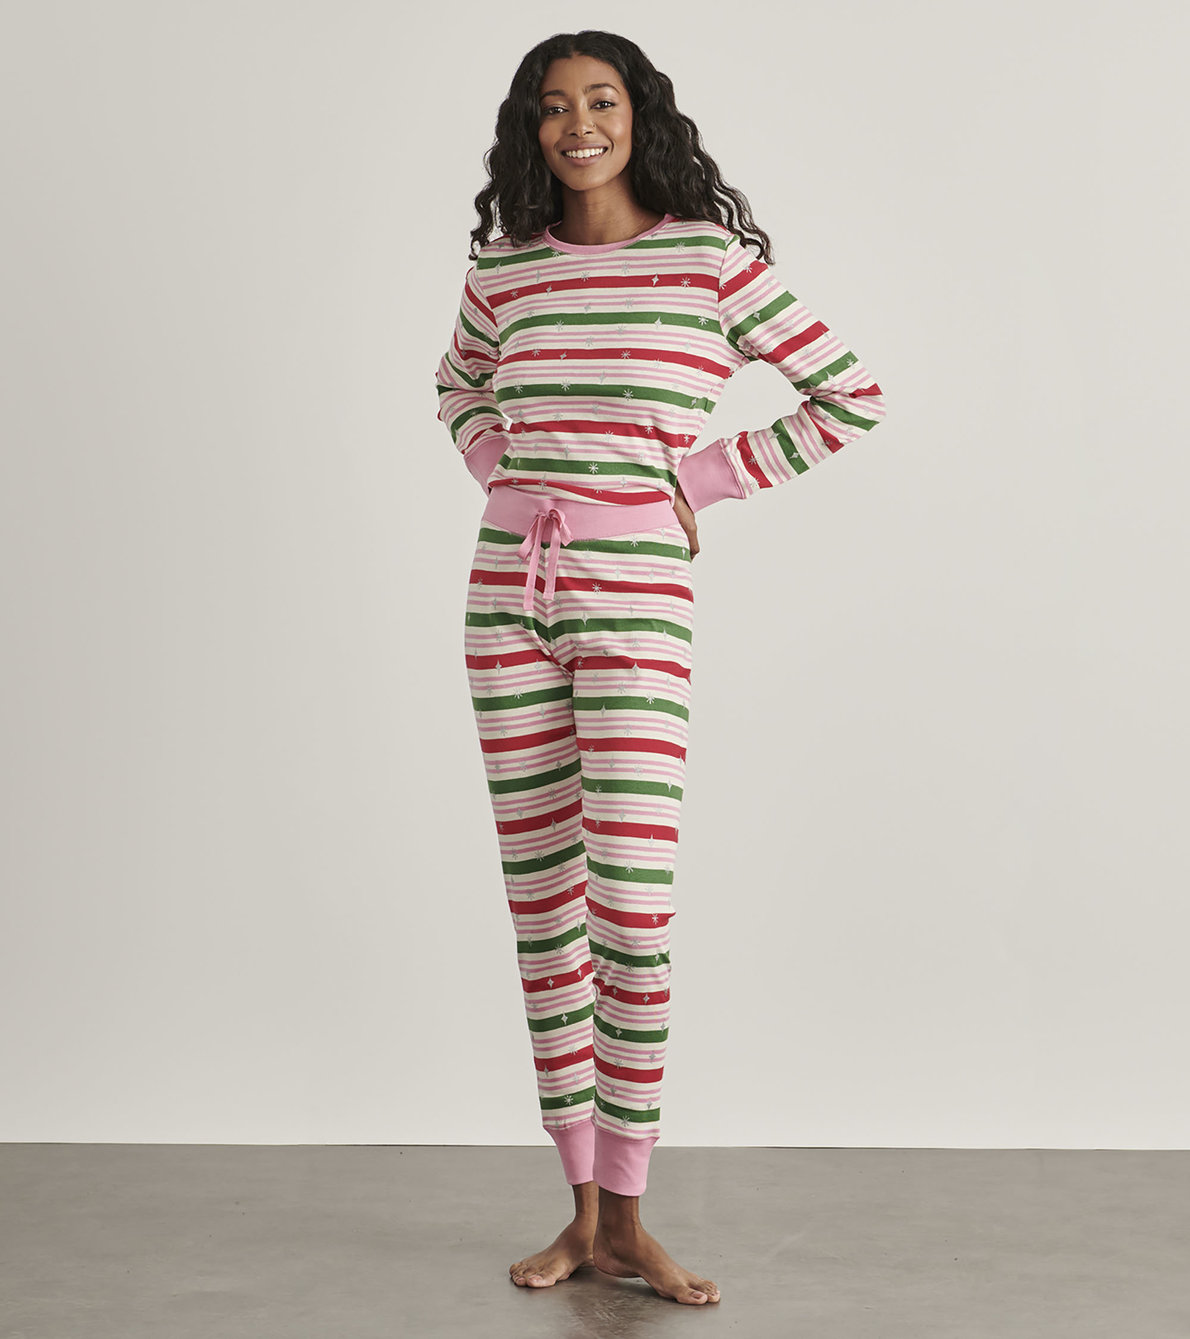 View larger image of Candy Stripes Women's Pajama Set